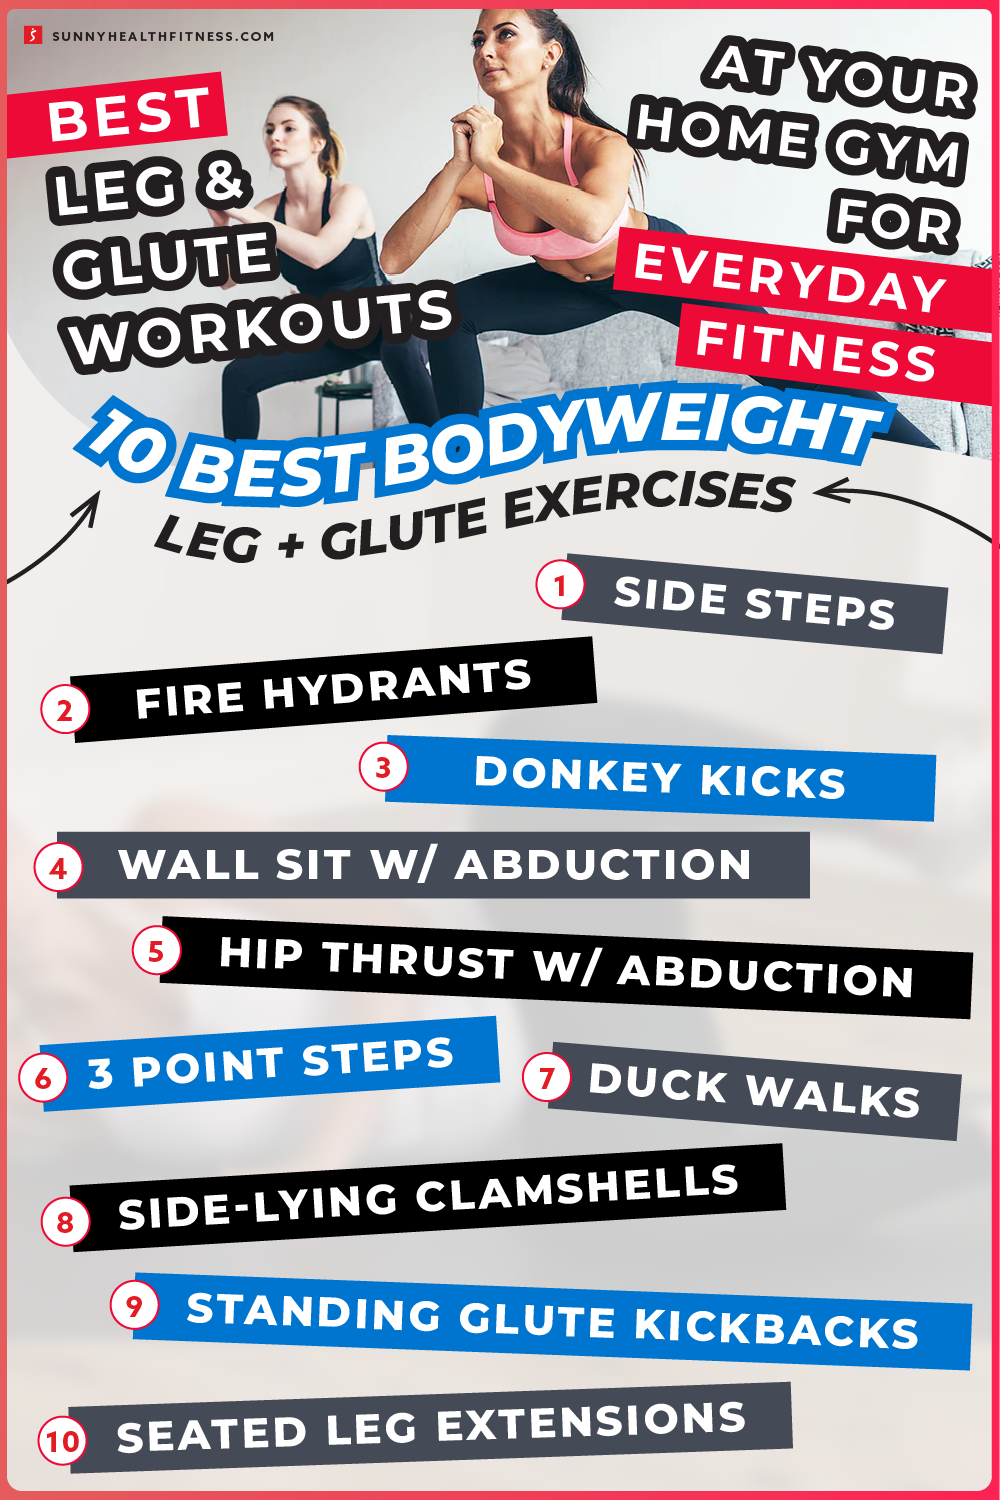 Best Leg & Glute Workouts at Your Home Gym for Everyday Fitness Best Bodyweight Exercises